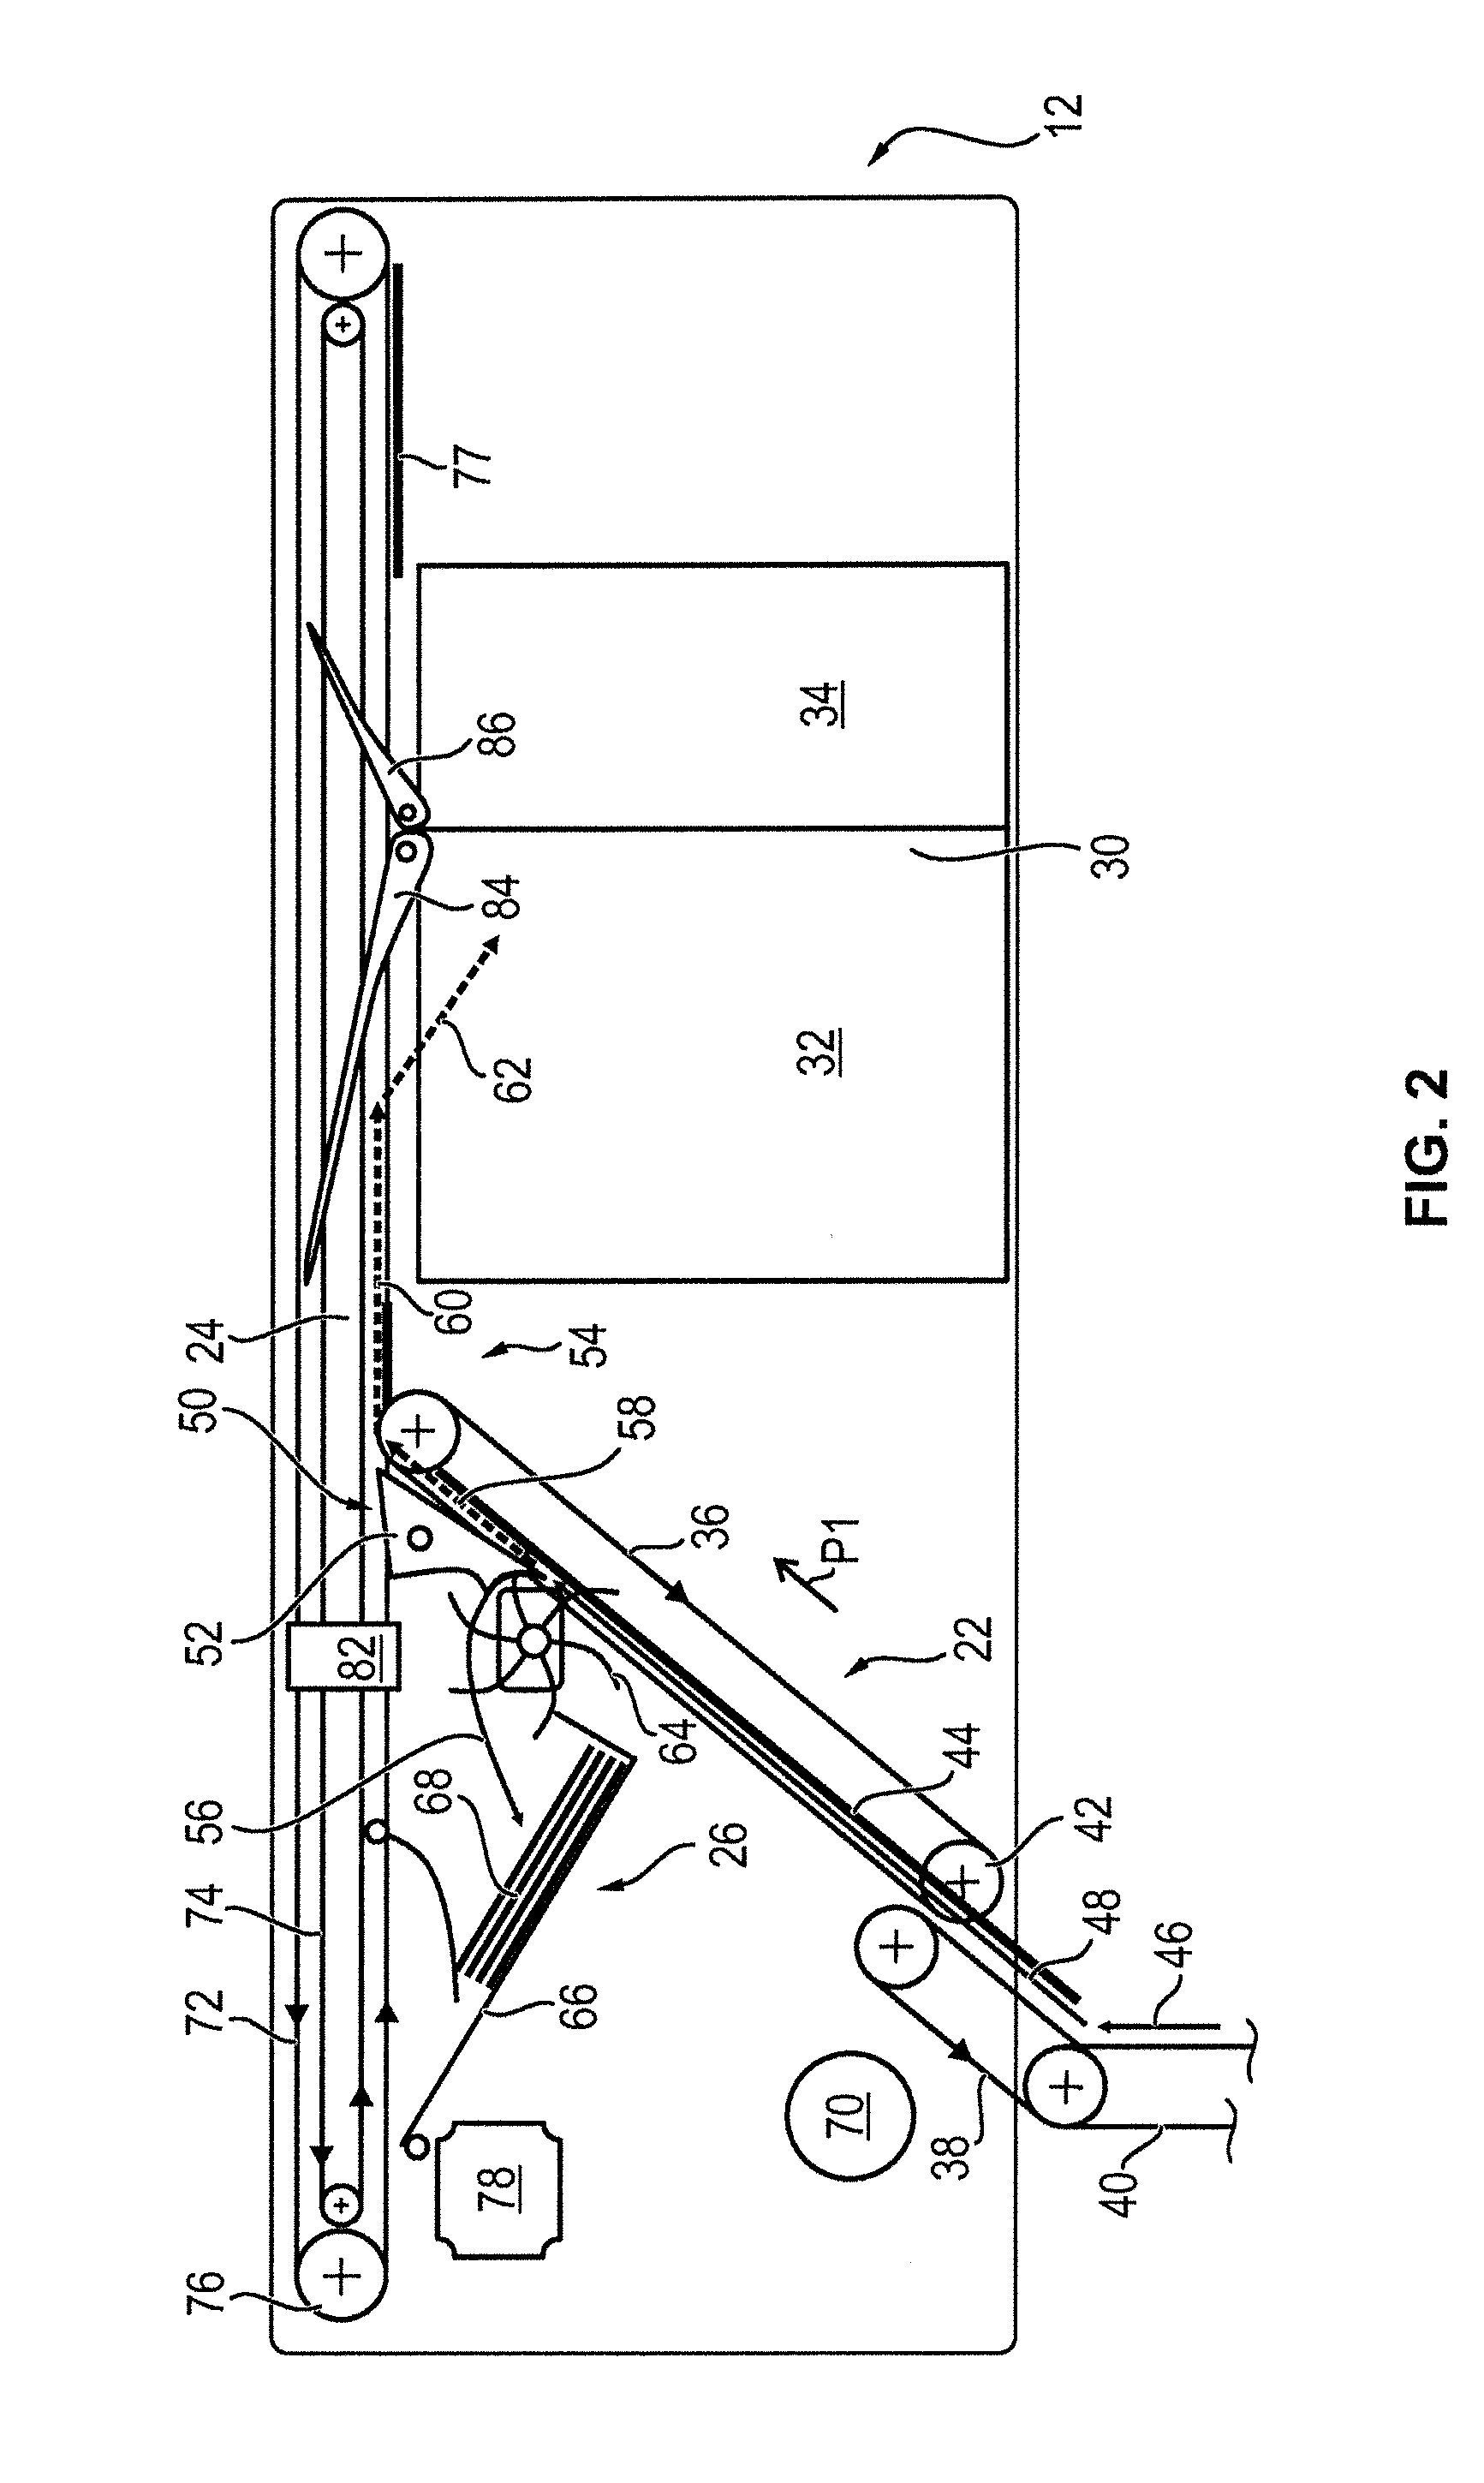 Device for handling notes of value